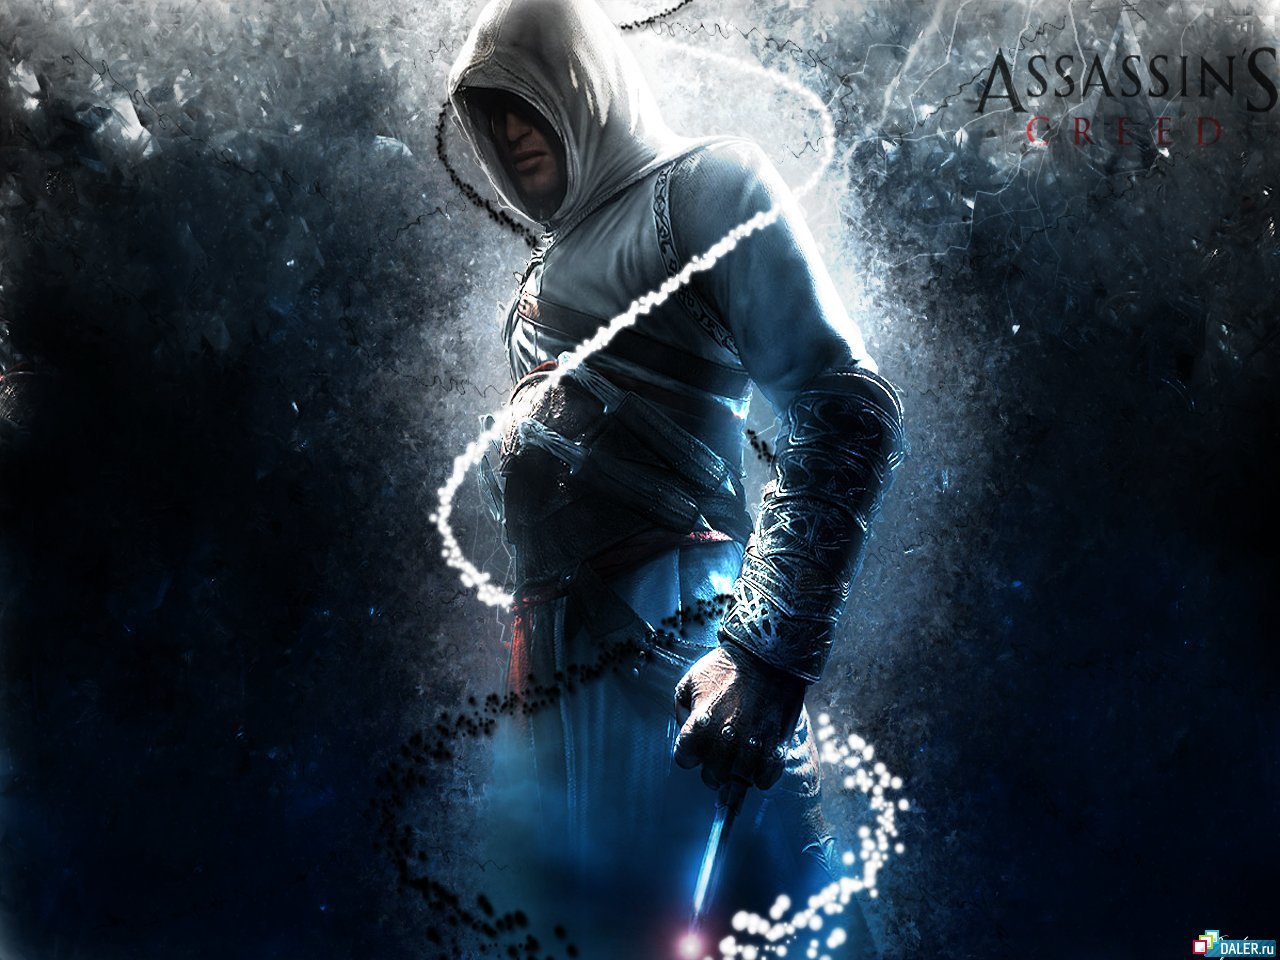 games, assassin's creed, blue